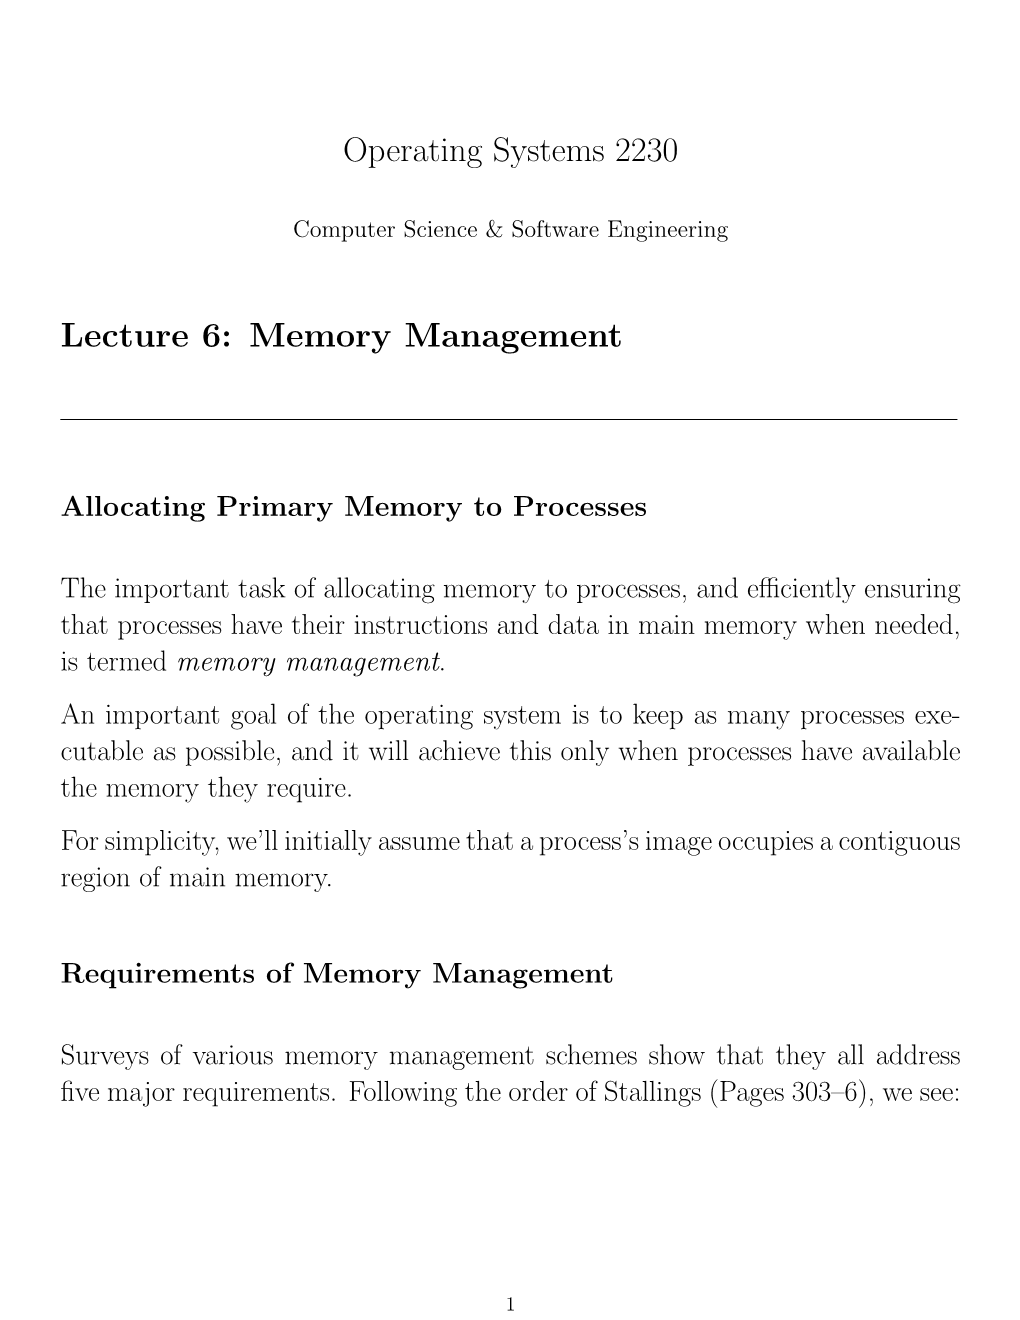 Operating Systems 2230 Lecture 6: Memory Management